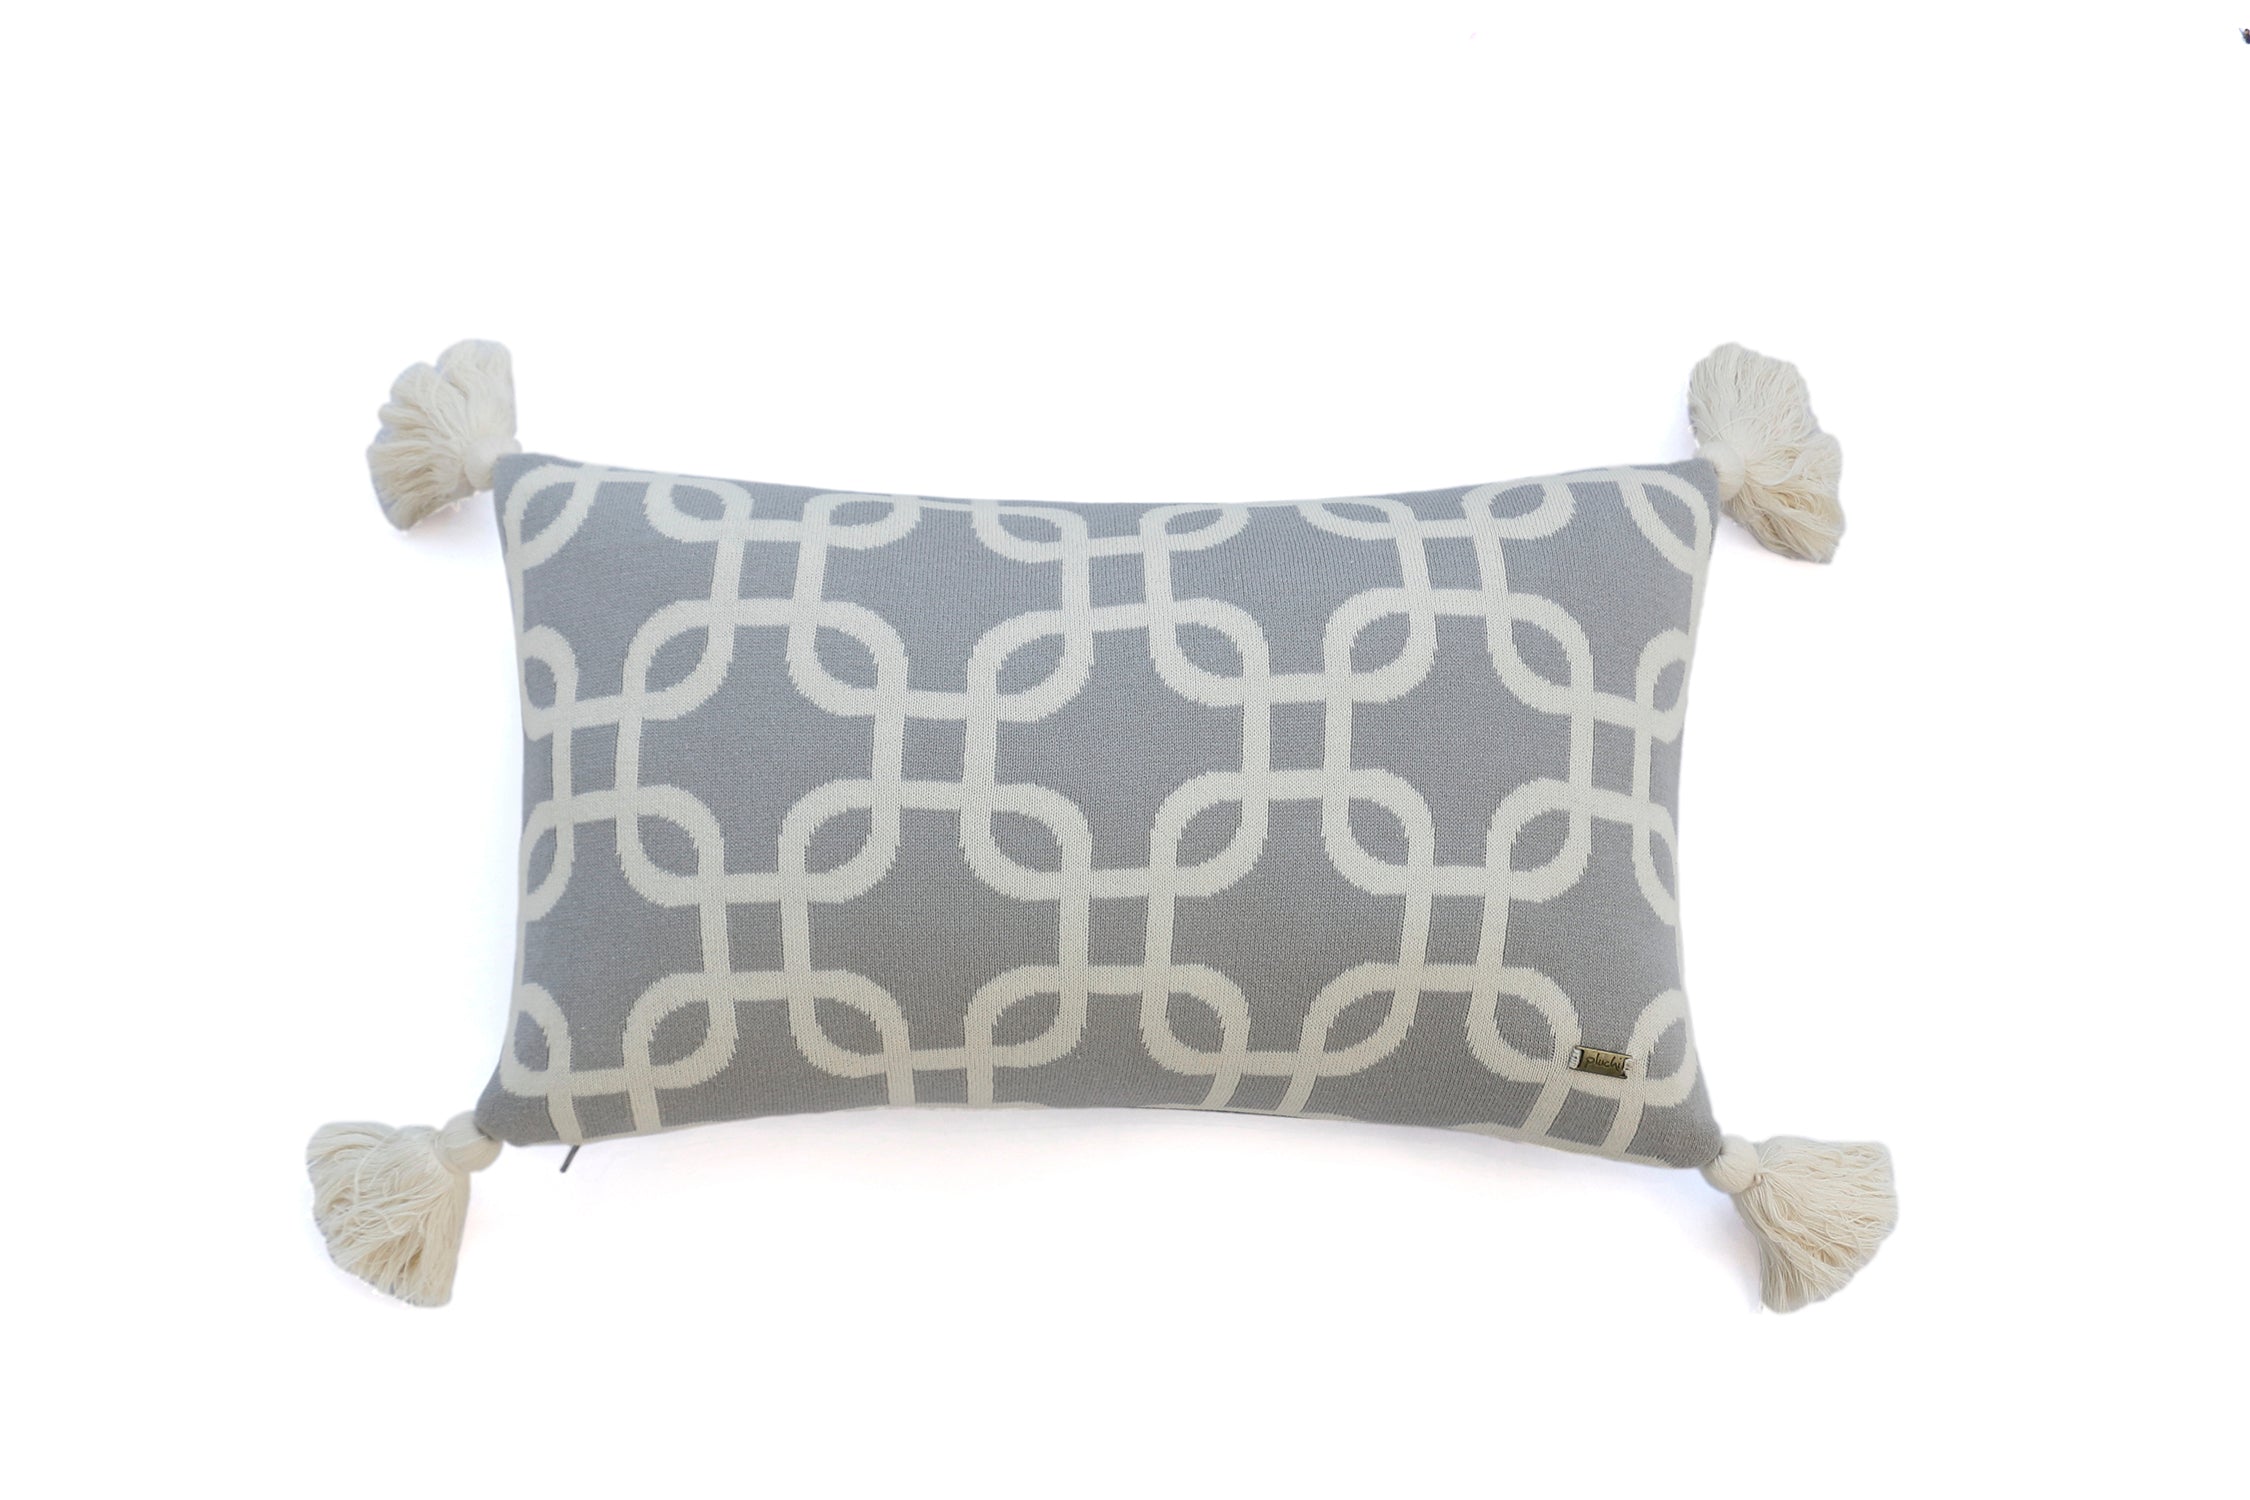 Stroke - Light Grey &amp; Natural Color Cotton Knitted Decorative Cushion Cover